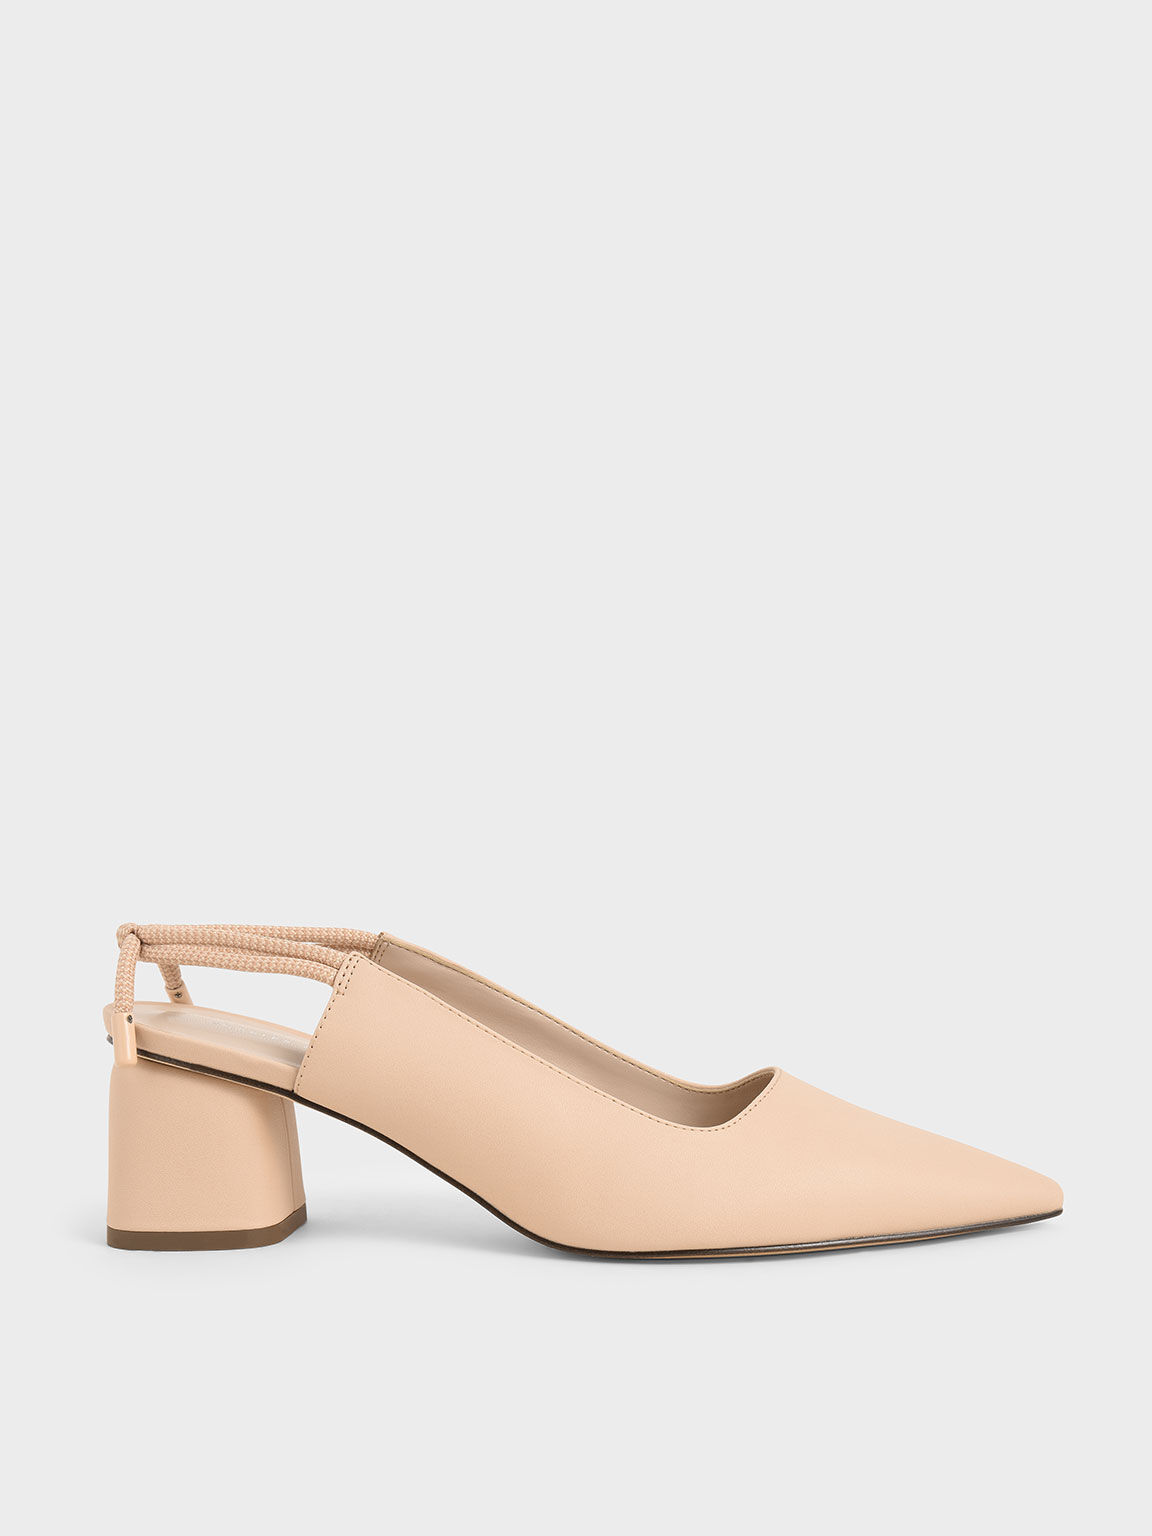 Nude Knotted Slingback Pumps - CHARLES & KEITH